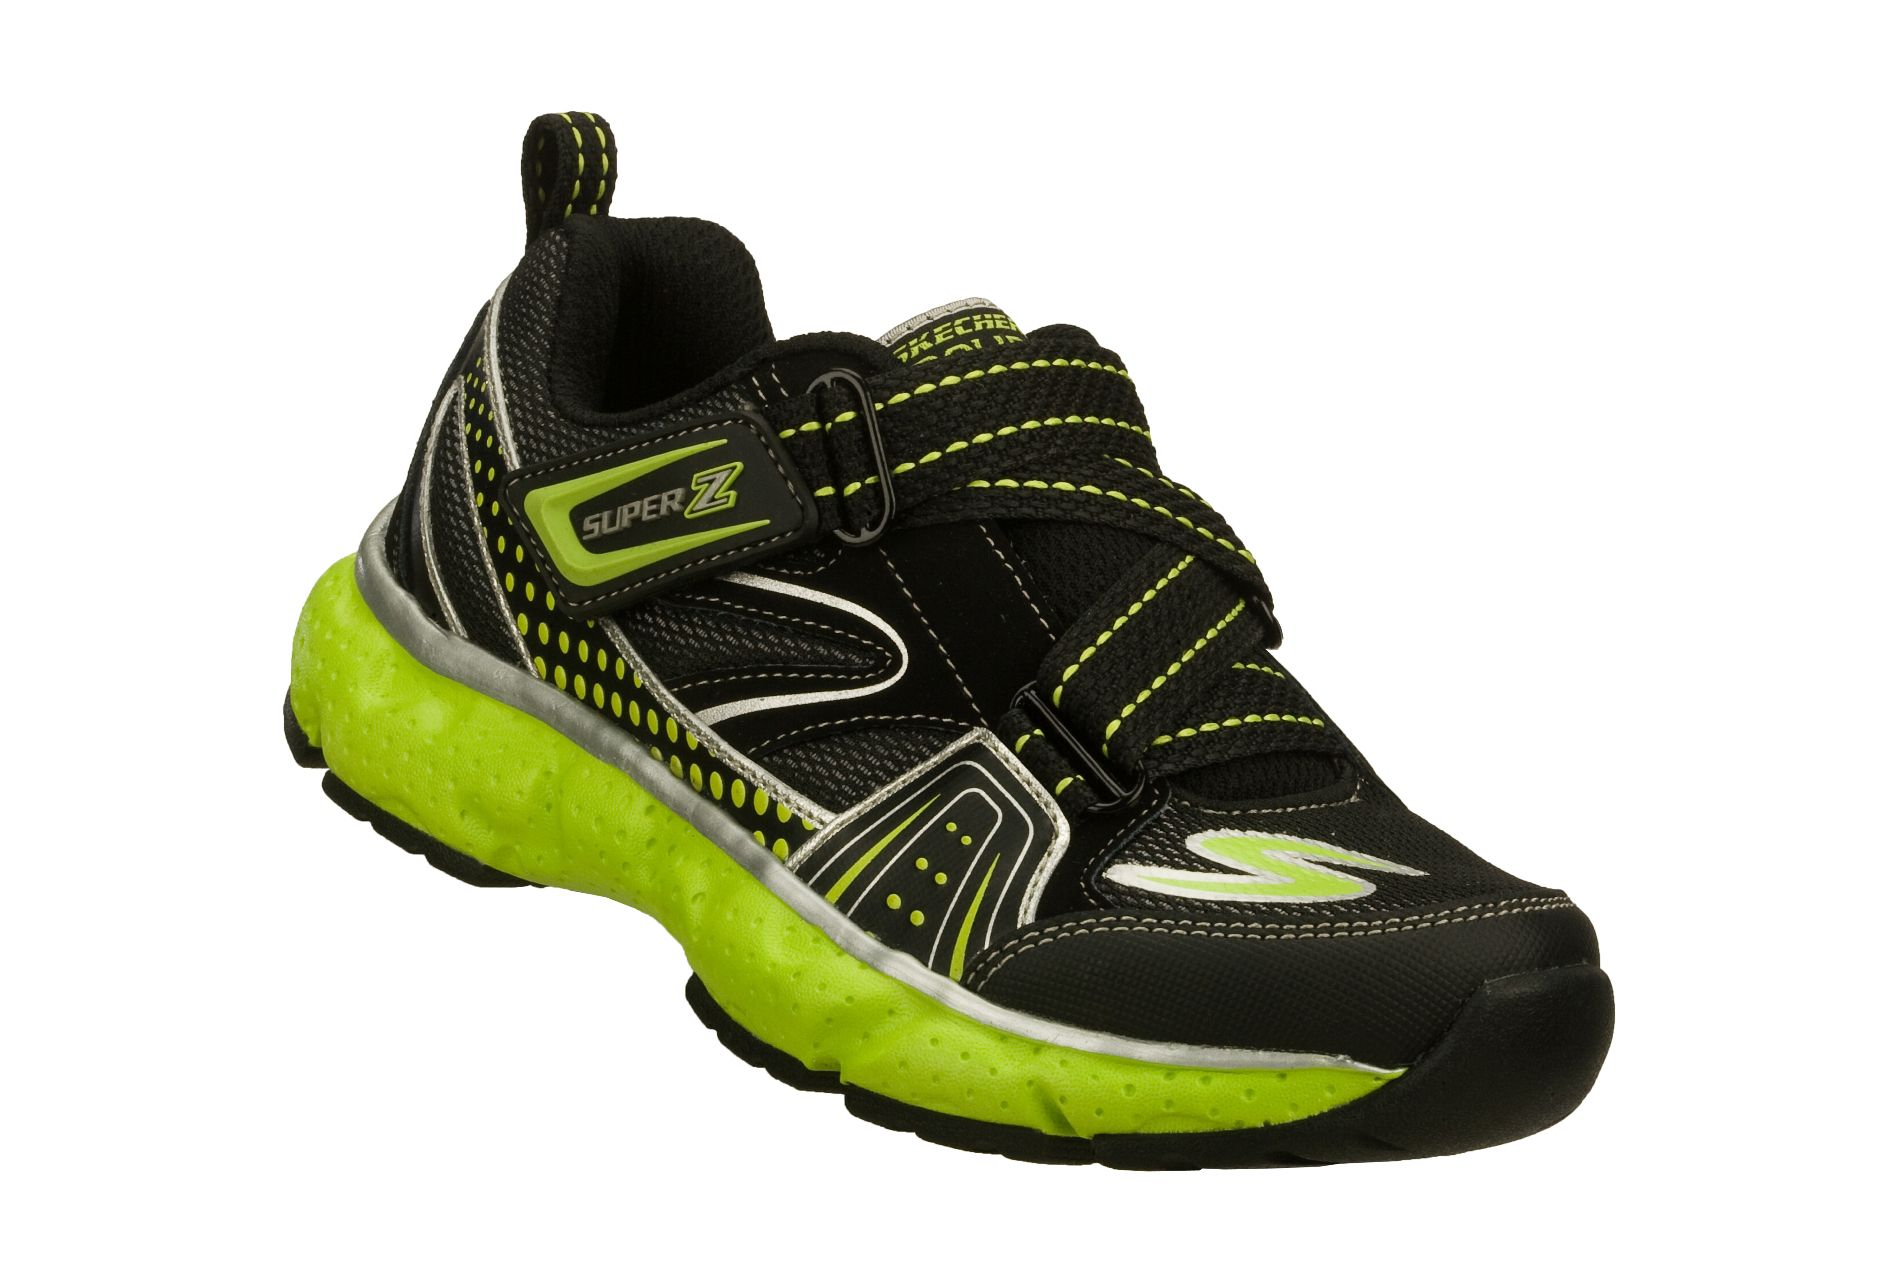 Skechers Boy's Colossal Athletic Shoe - Black/Lime